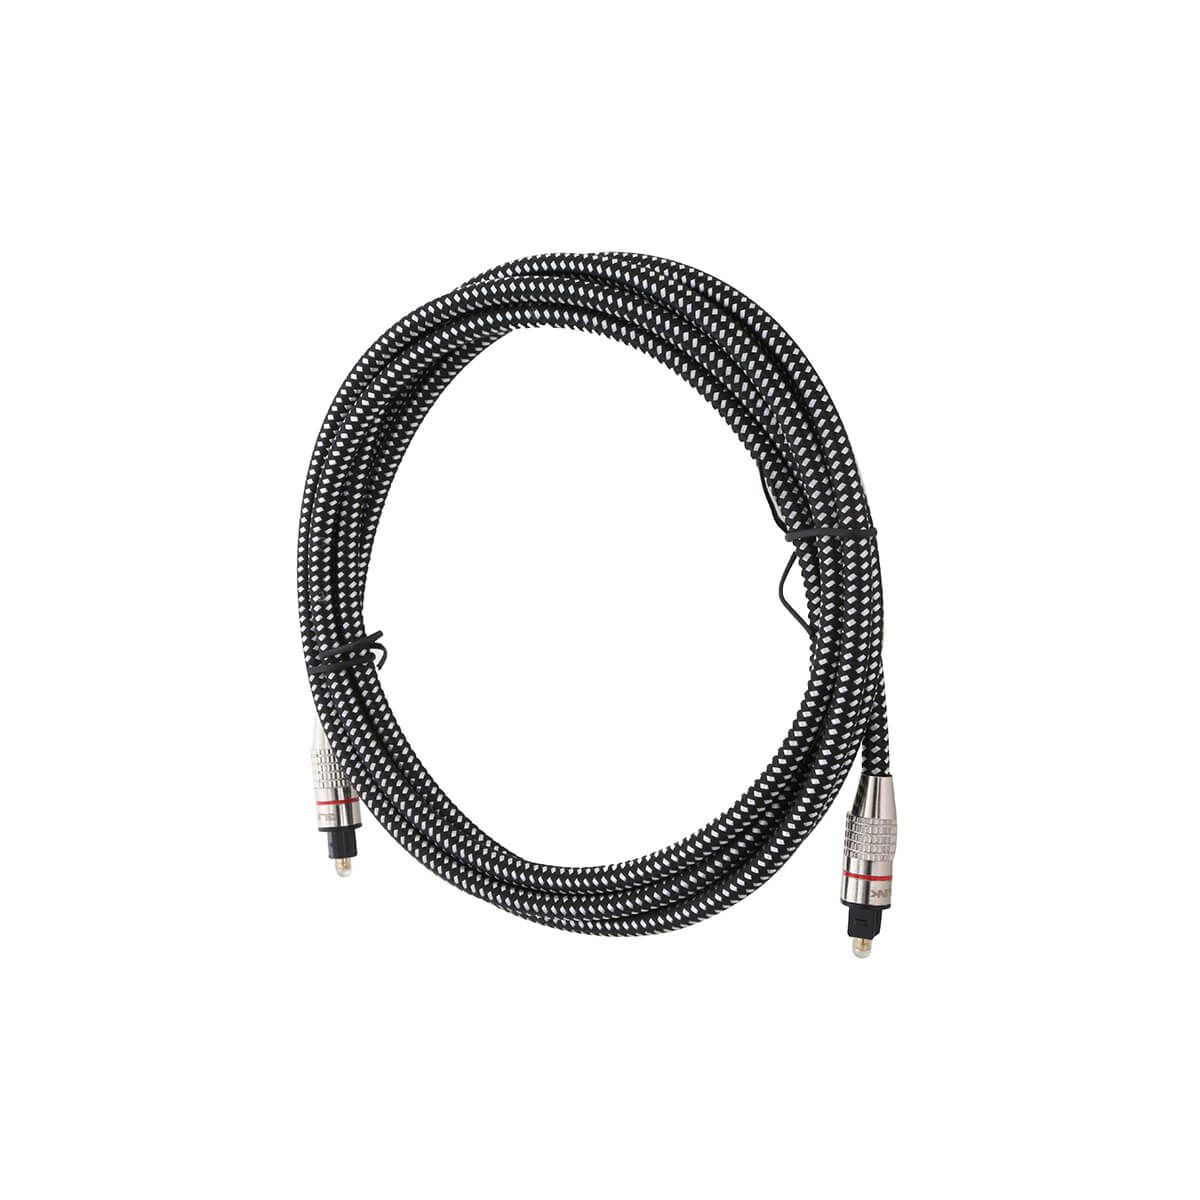 Optical Audio Cables for sale